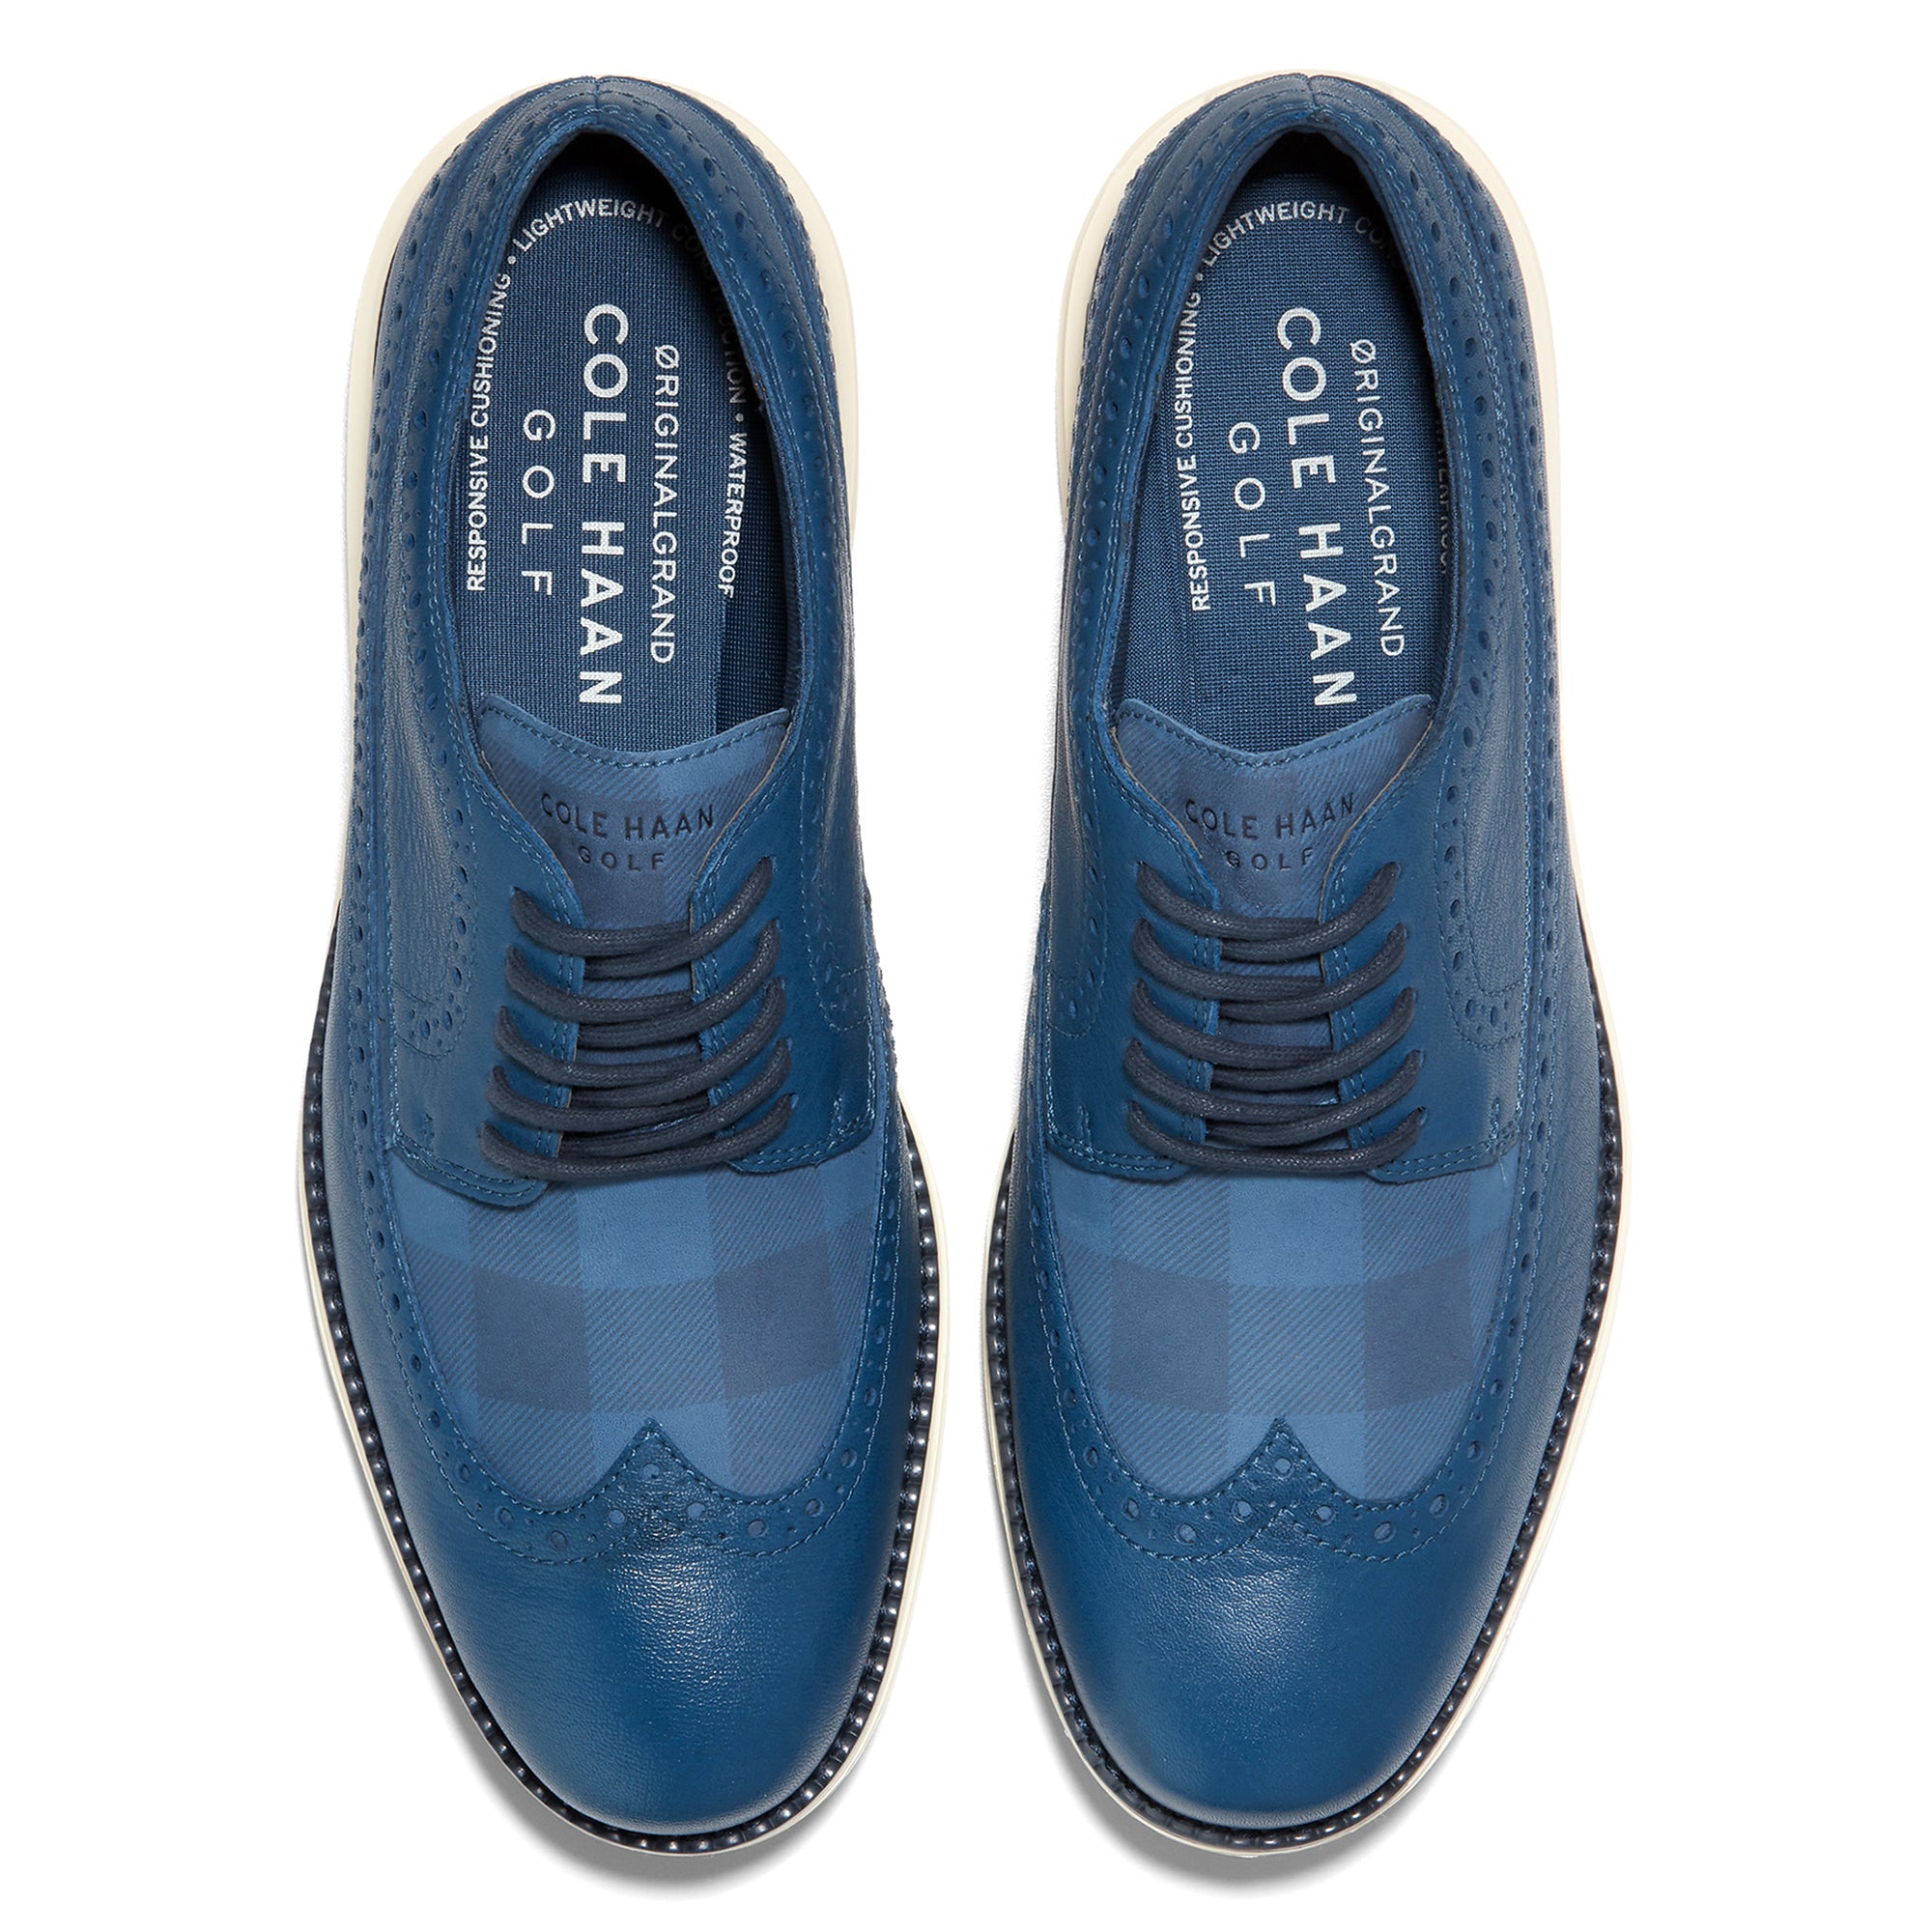 Cole Haan OriginalGrand Wing Ox Golf Shoes